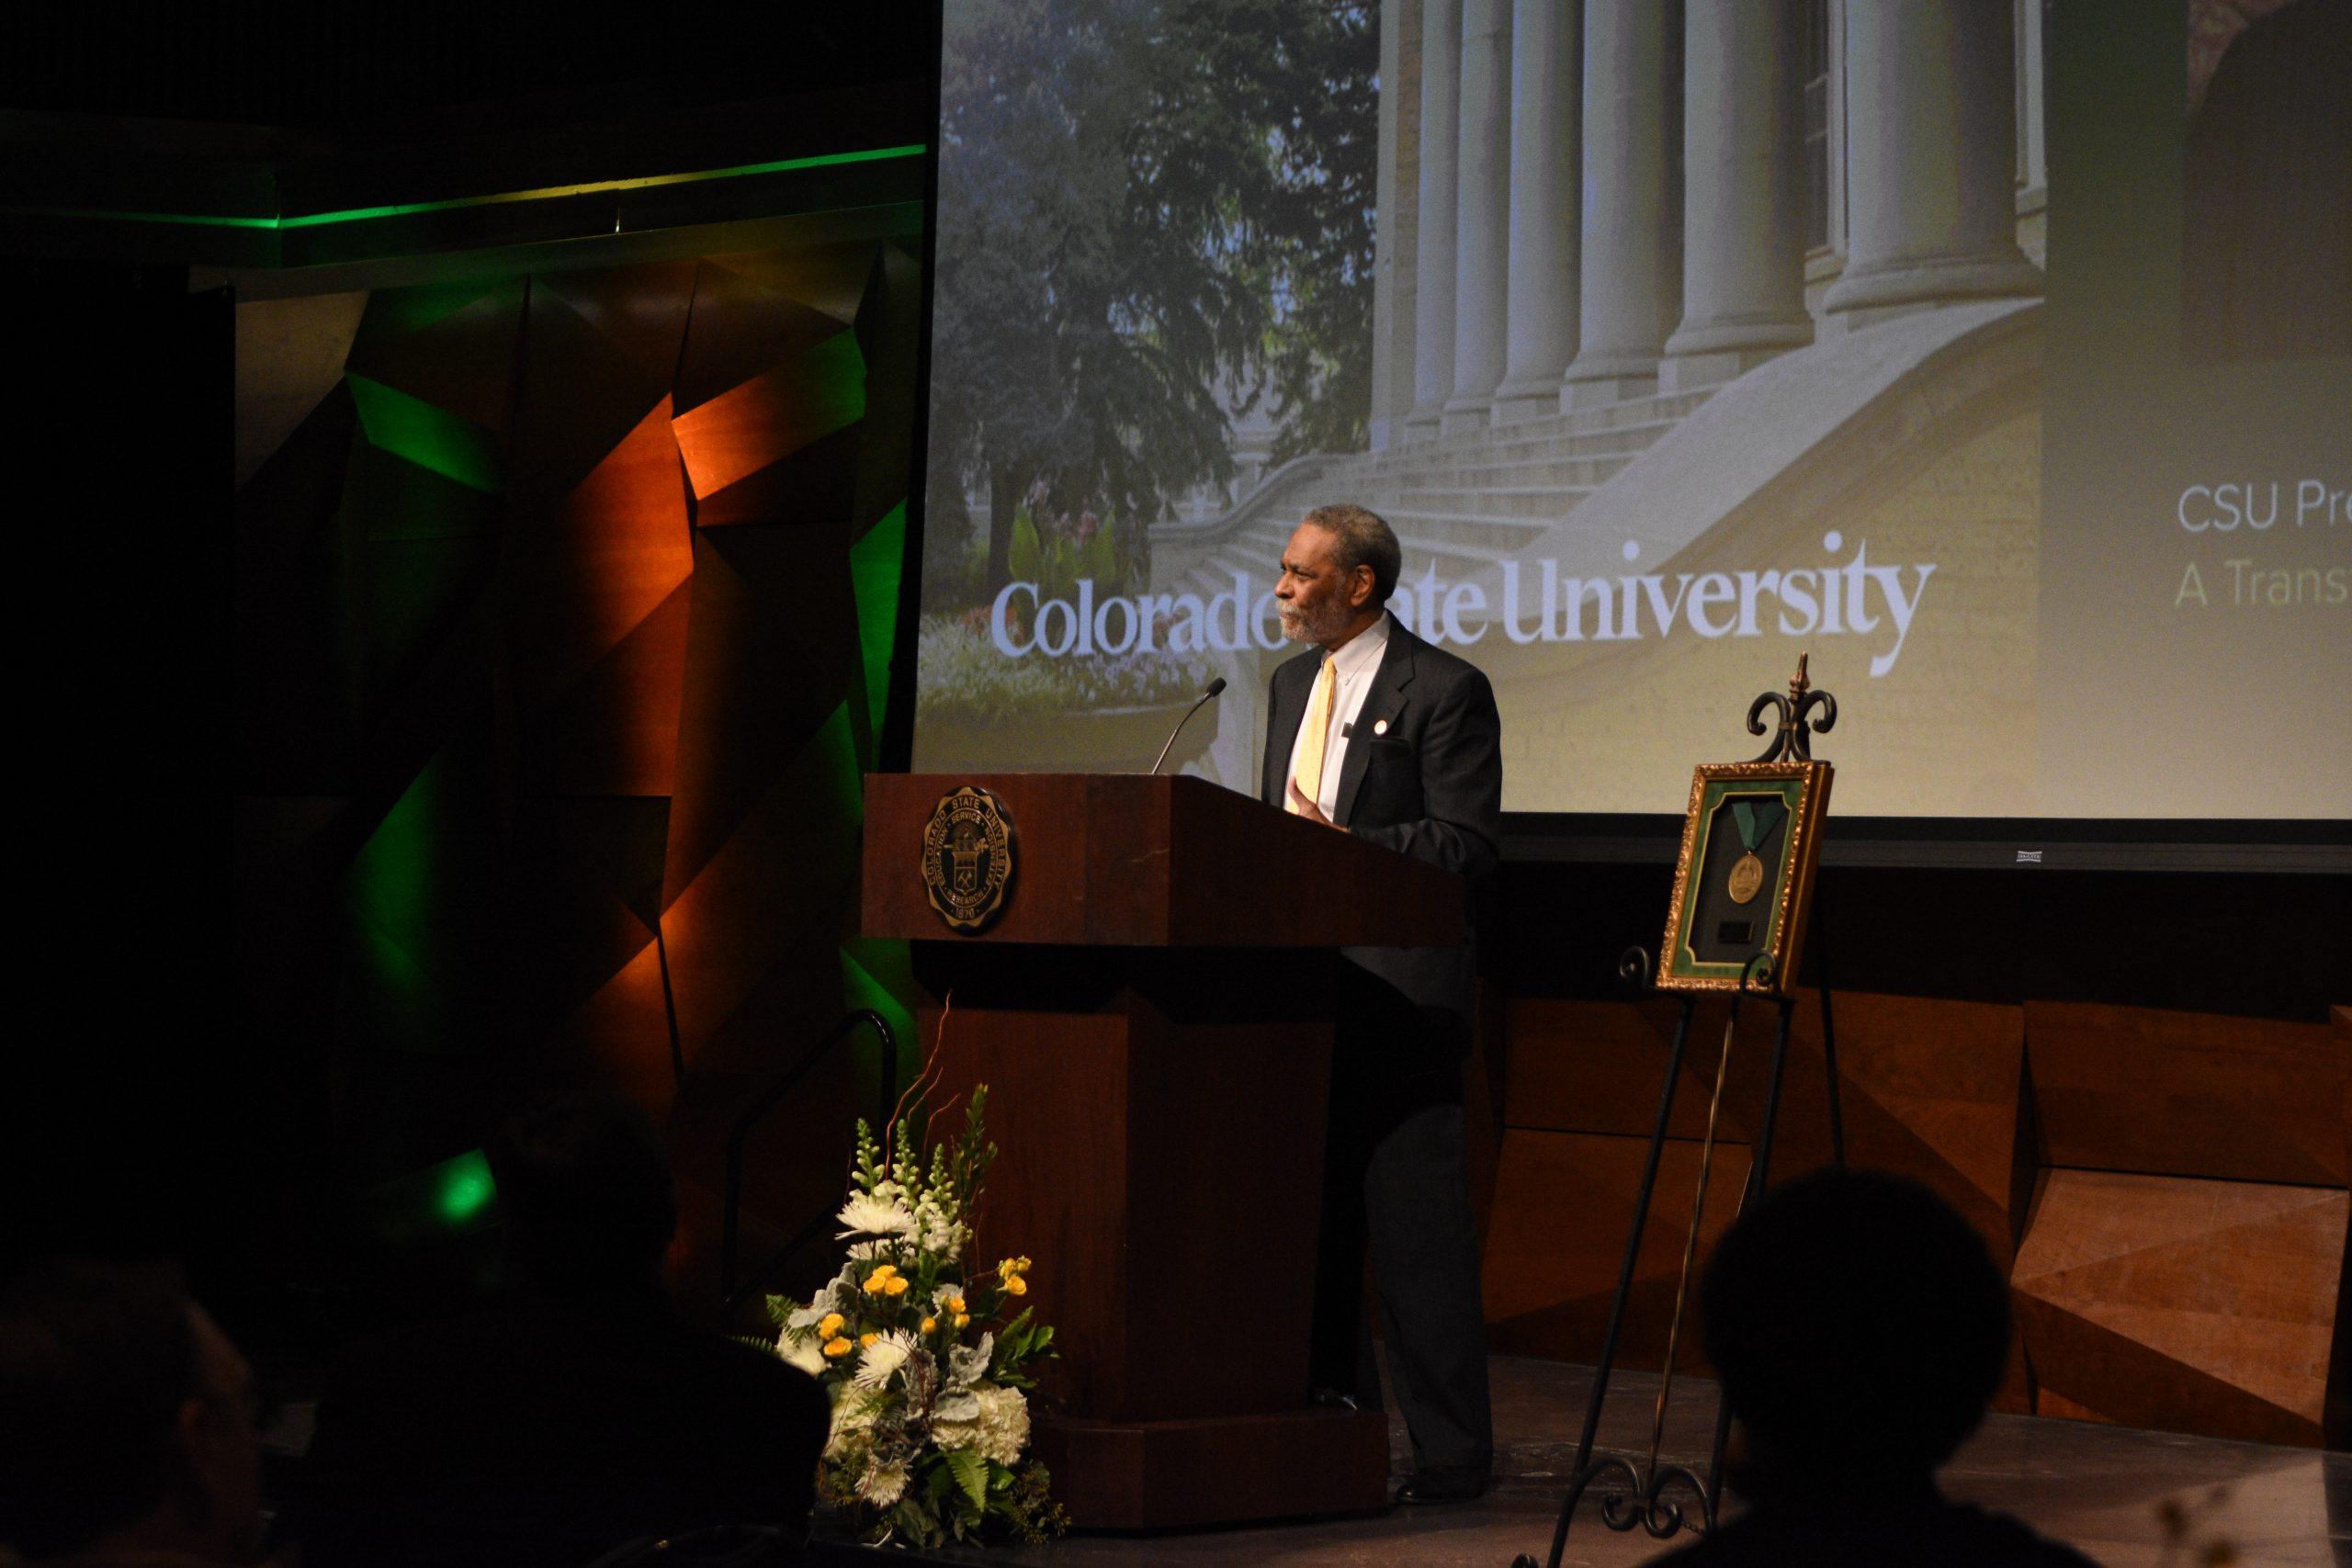 Former+CSU+President+Albert+Yates+receives+Founders+Day+Medal%2C+reflects+on+land-grant+legacy